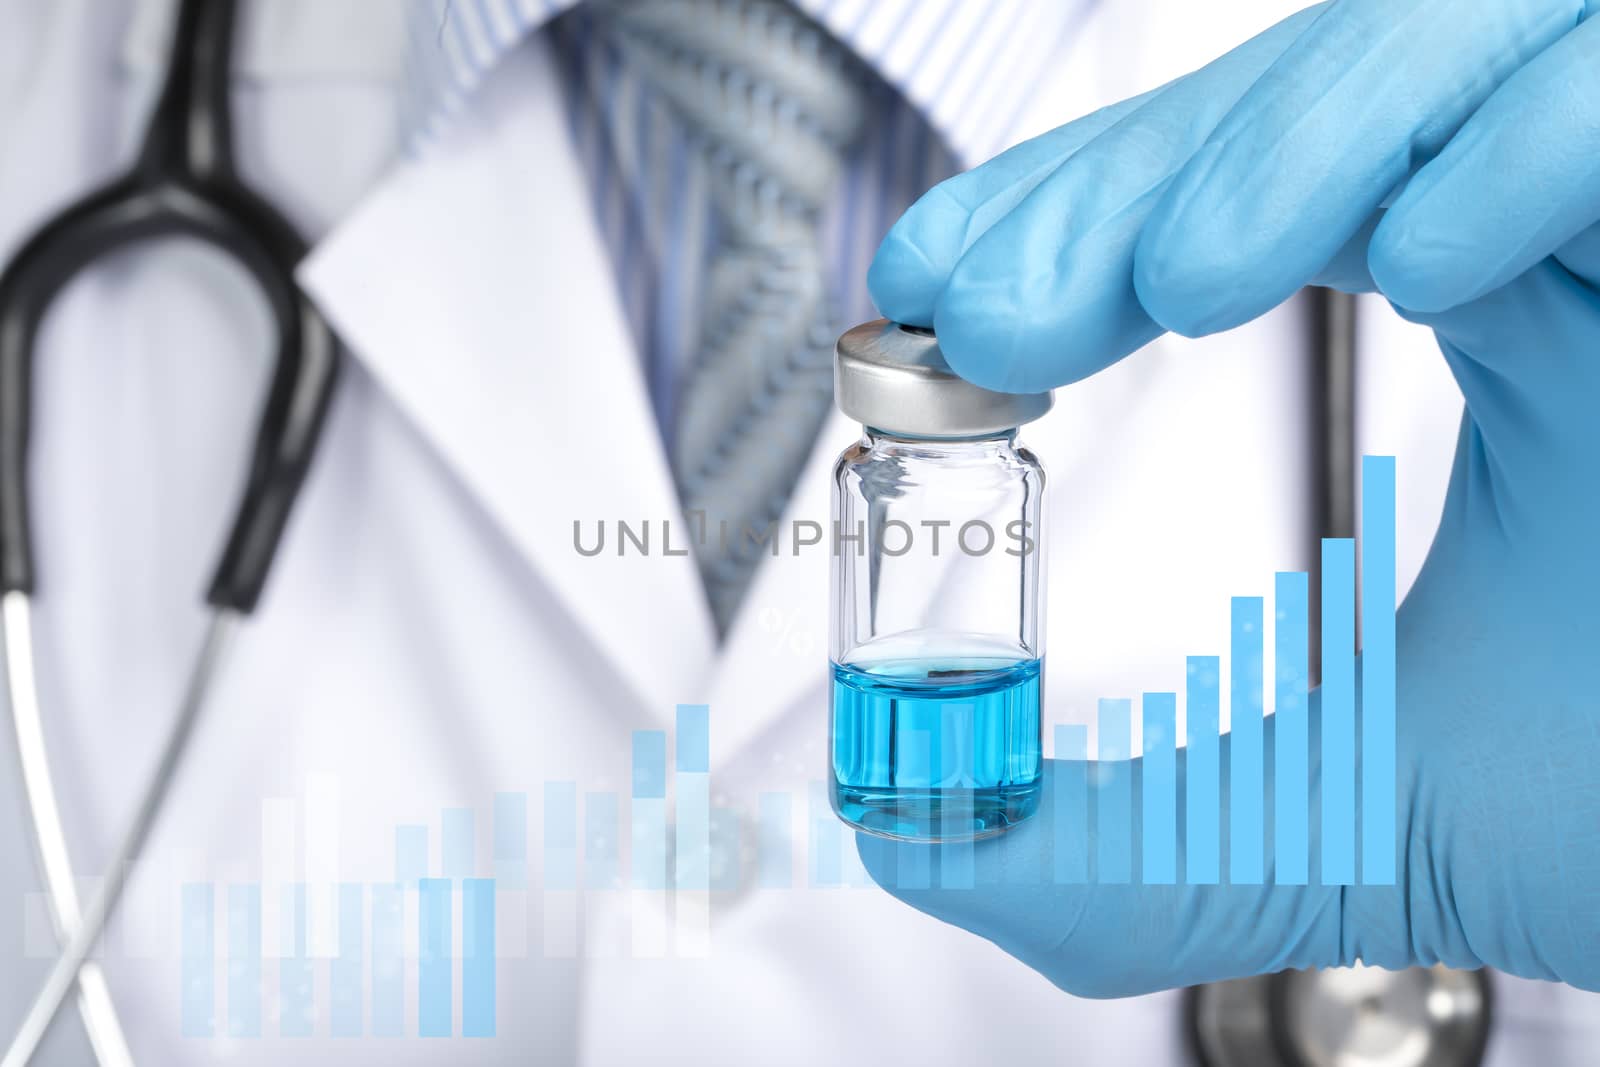 A doctor in white coat holding a vaccine vial containing blue liquid. Medication or vaccine administration, covid-19 prevention concept.